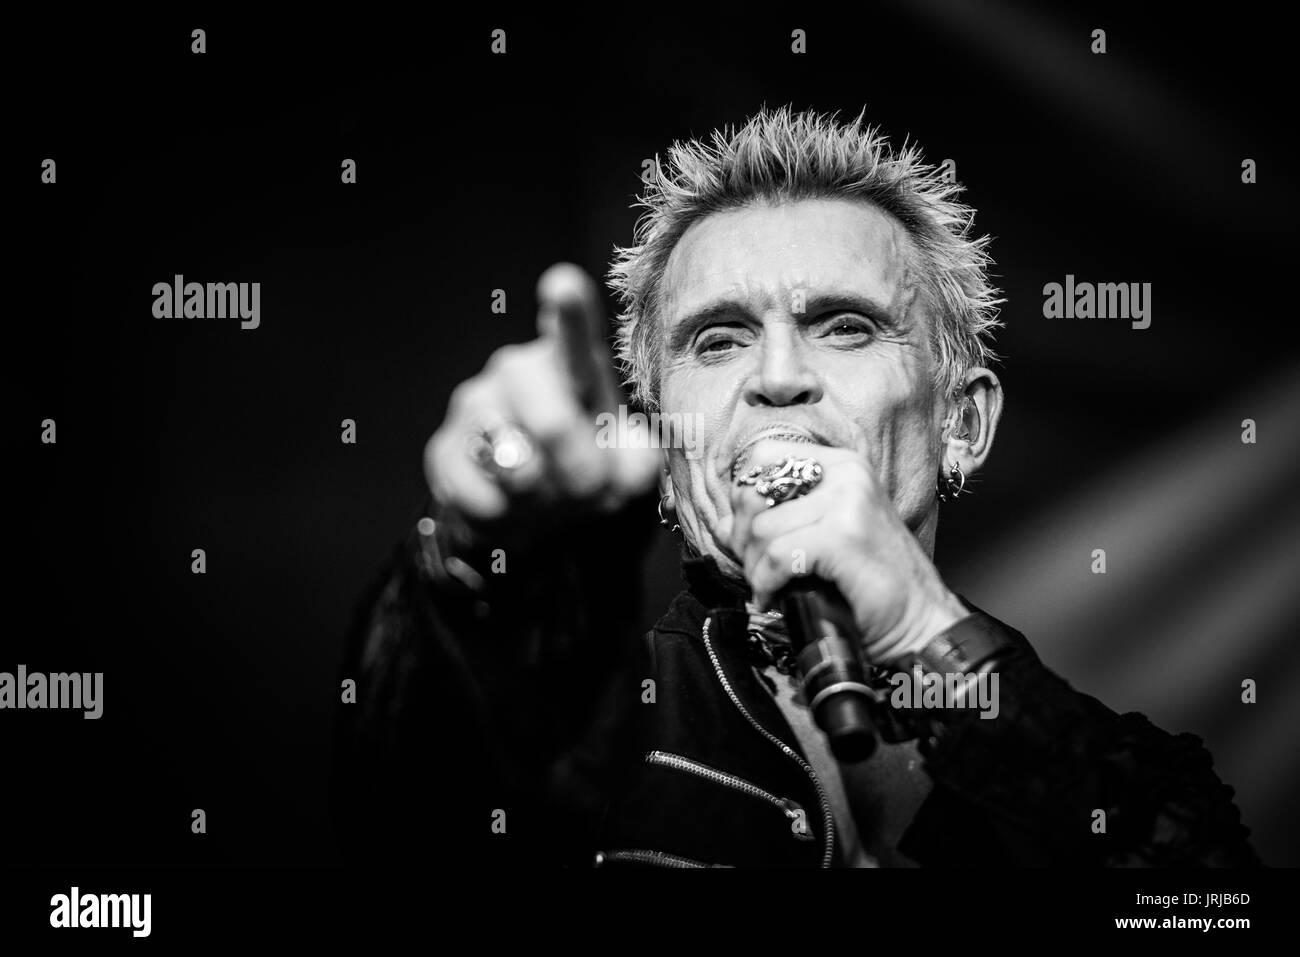 Billy Idol performing at a music festival in British Columbia Canada in black and white. Stock Photo